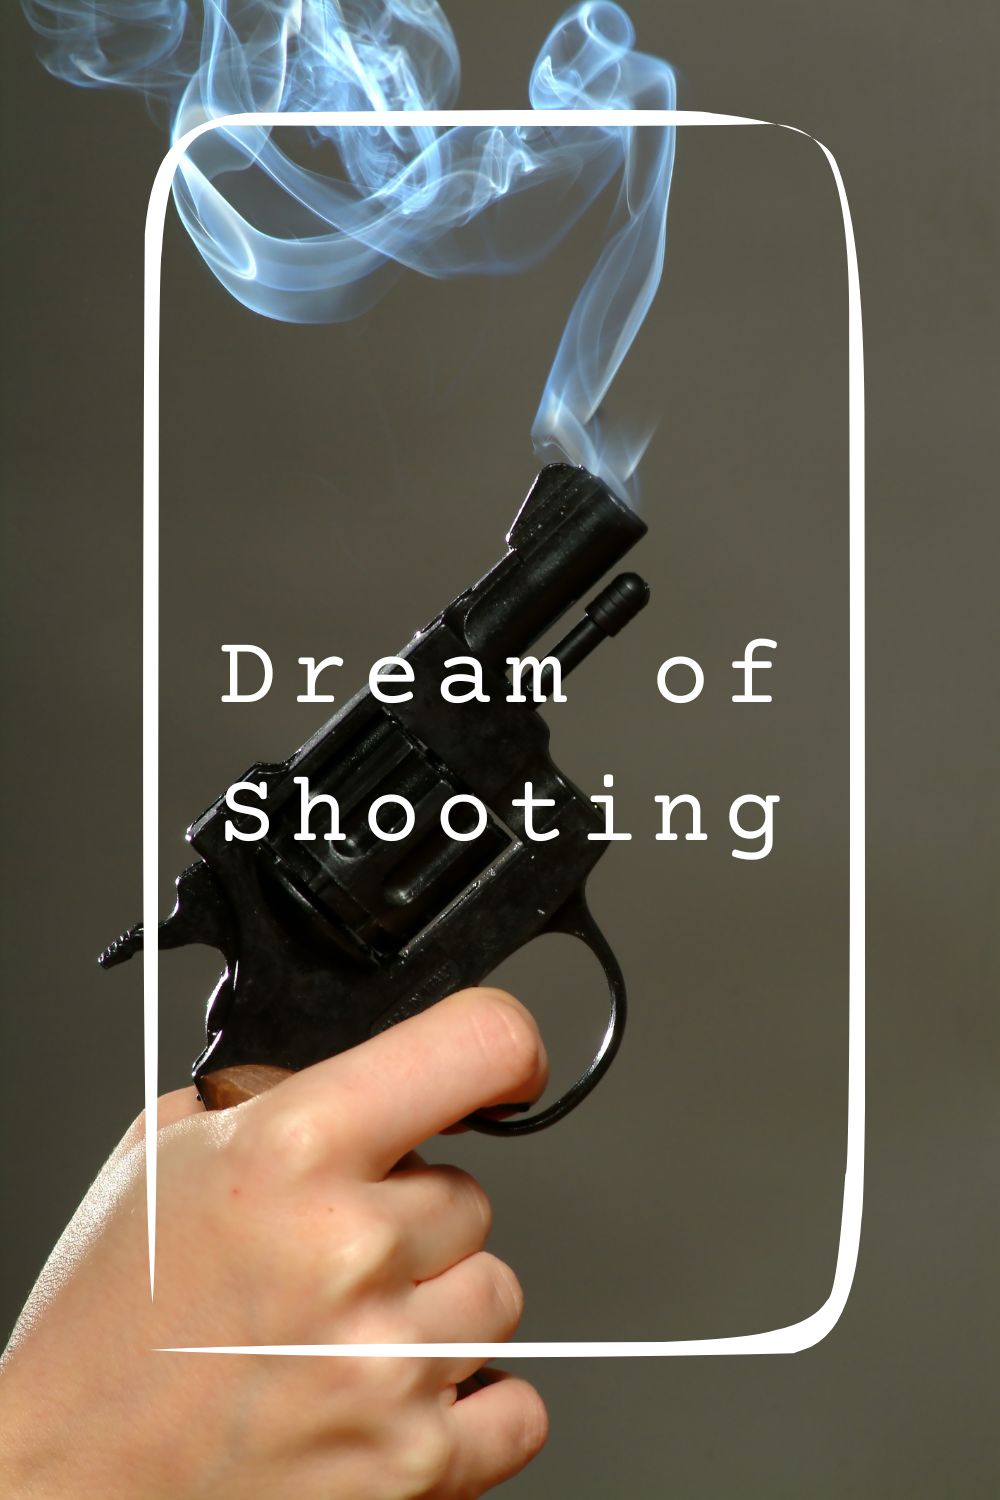 12 Dream of Shooting Meanings4